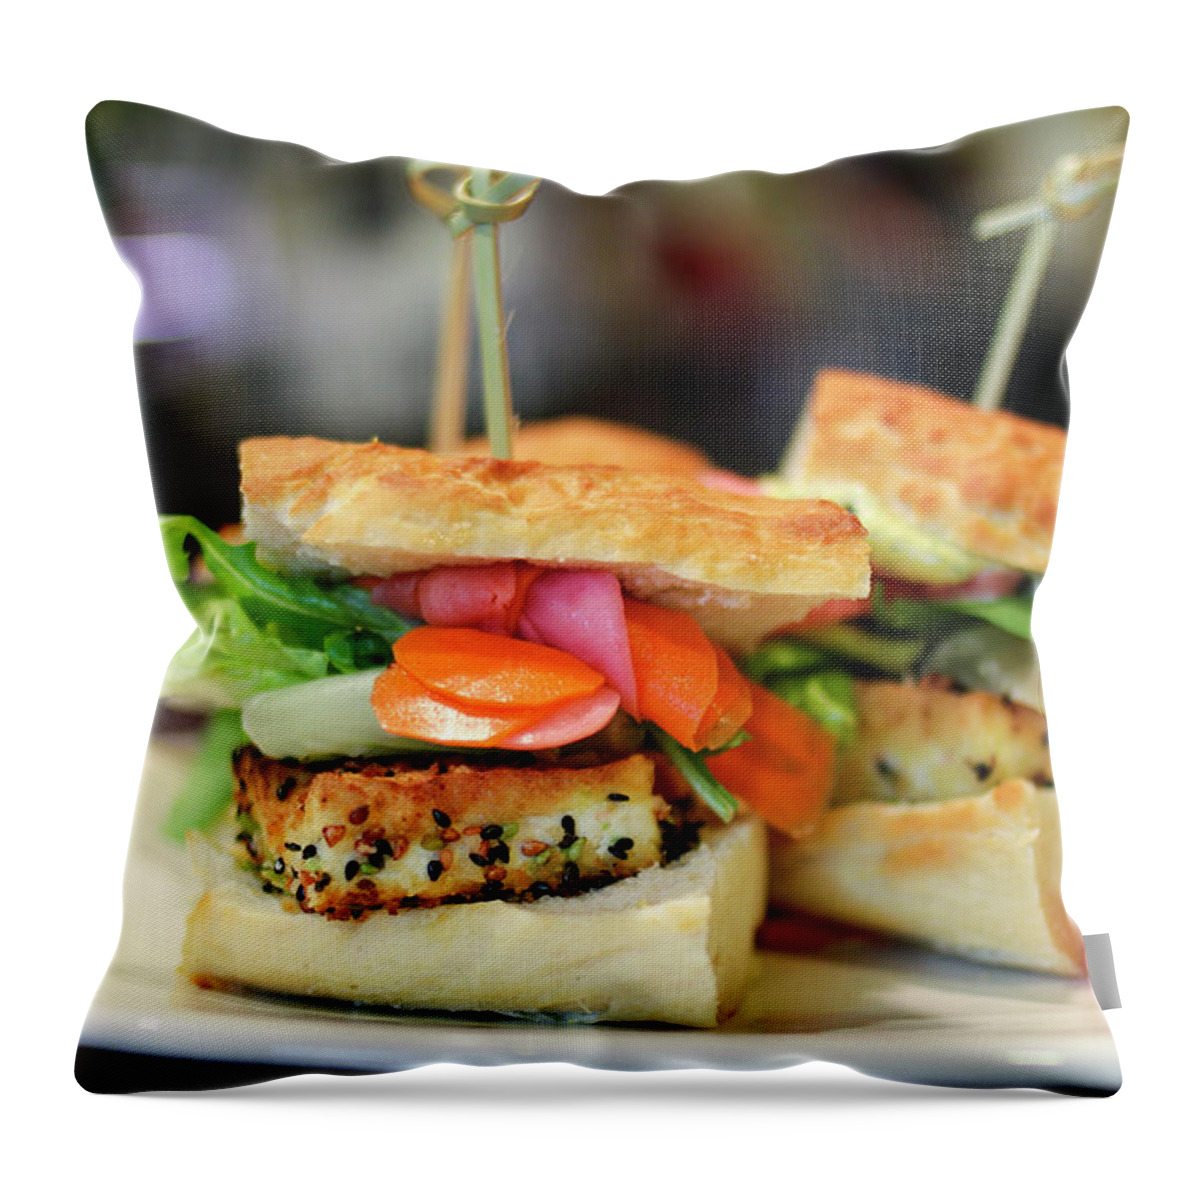 Wasabi Throw Pillow featuring the photograph Sesame Tofu Sliders by Thanks For Taking Your Time To Look. Sher Yip